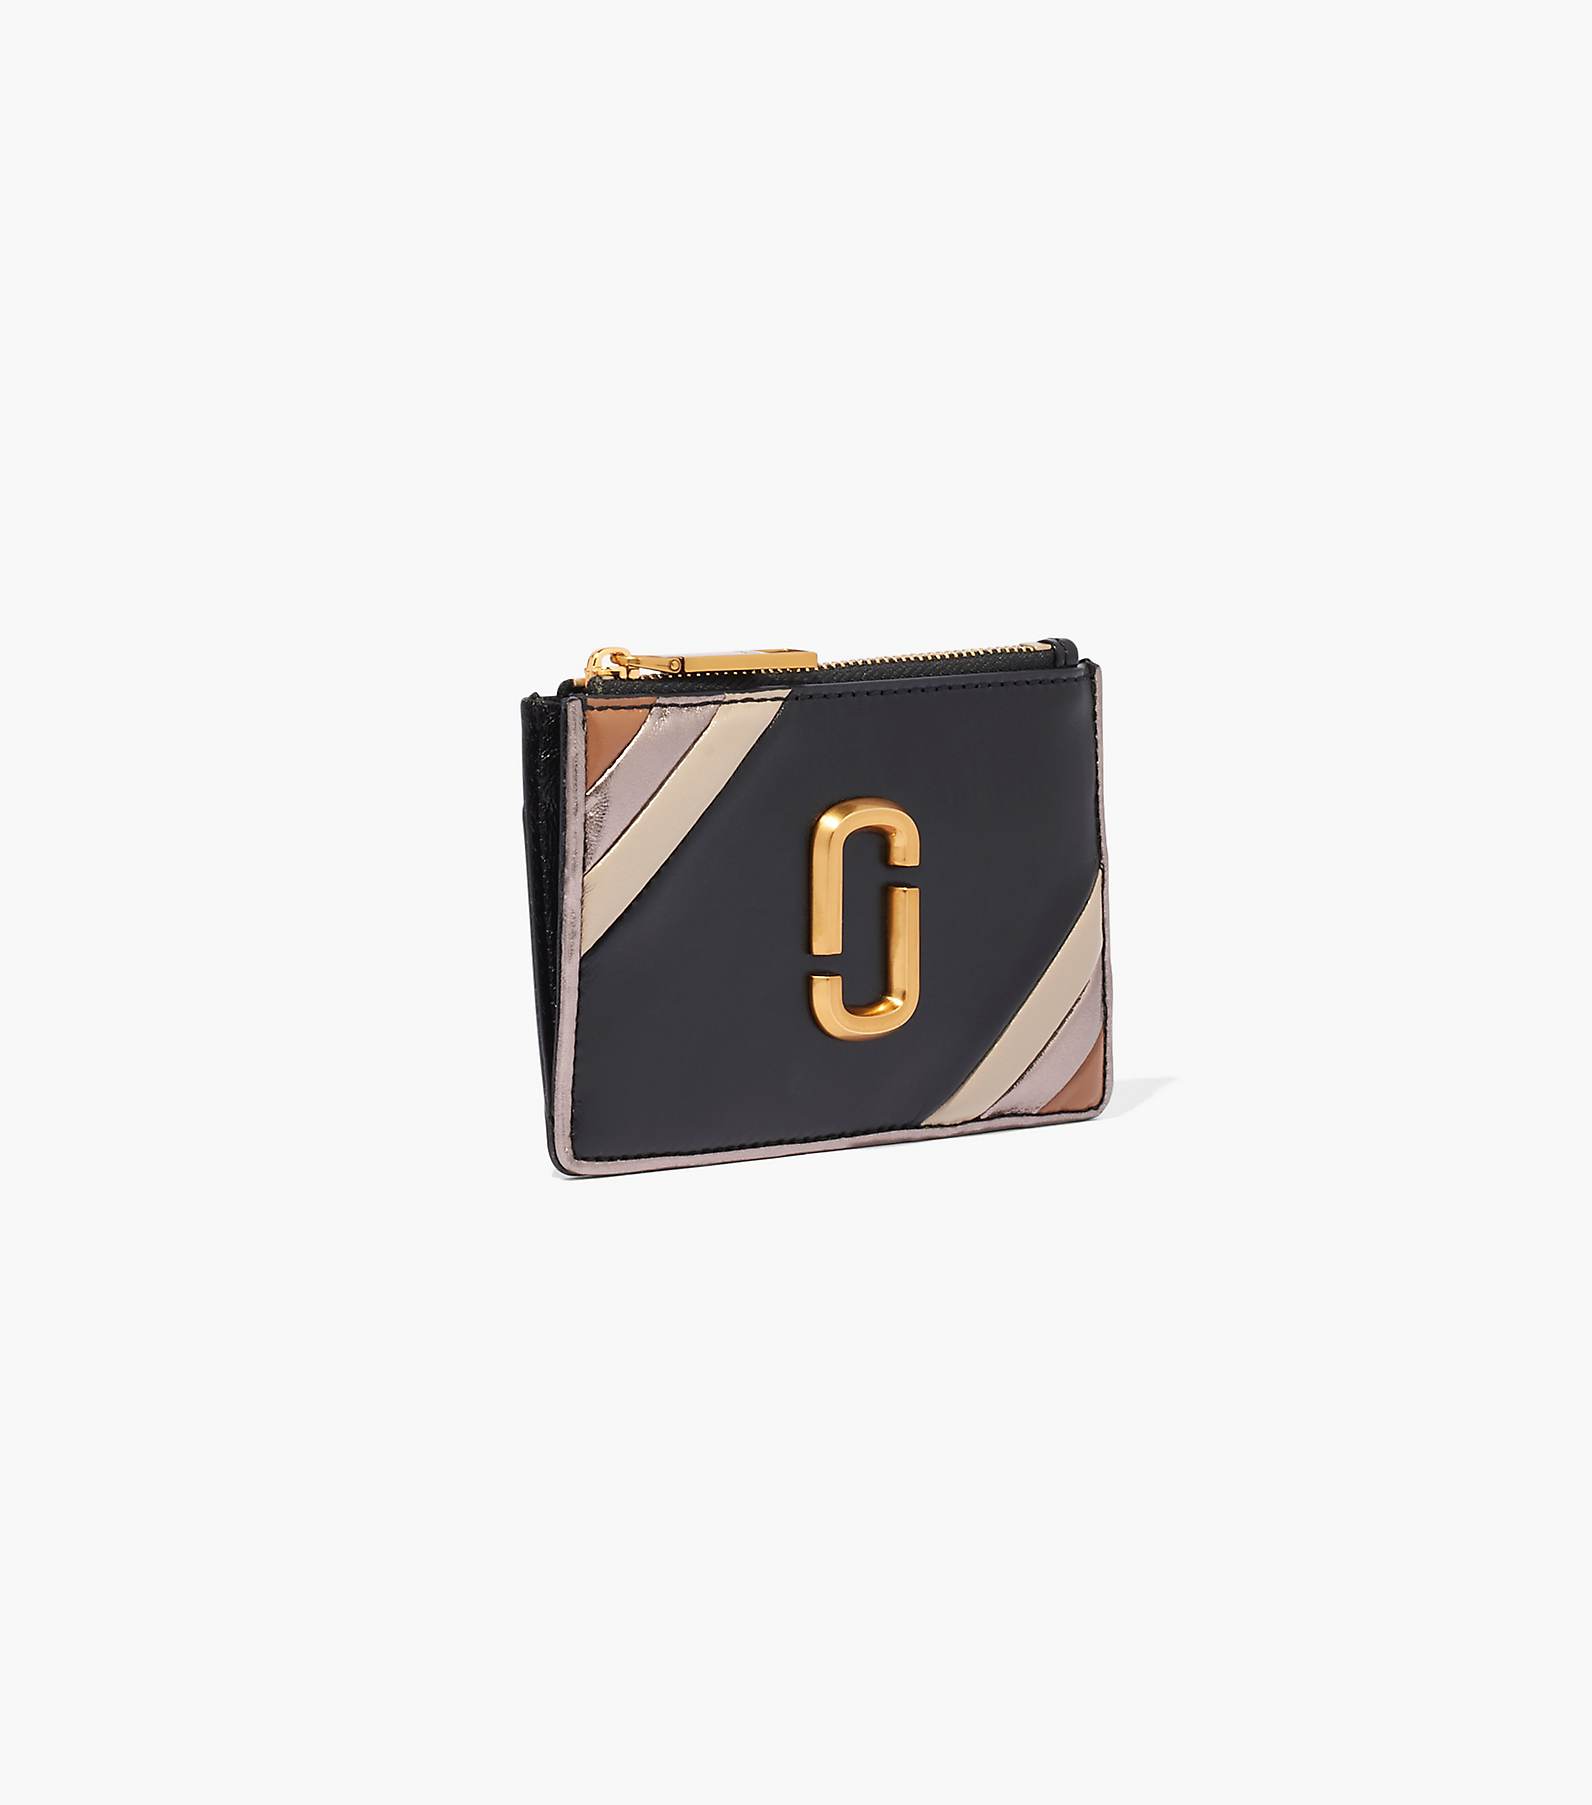 THE GLAM SHOT SHINY COLORBLOCK TOP ZIP MULTI WALLET